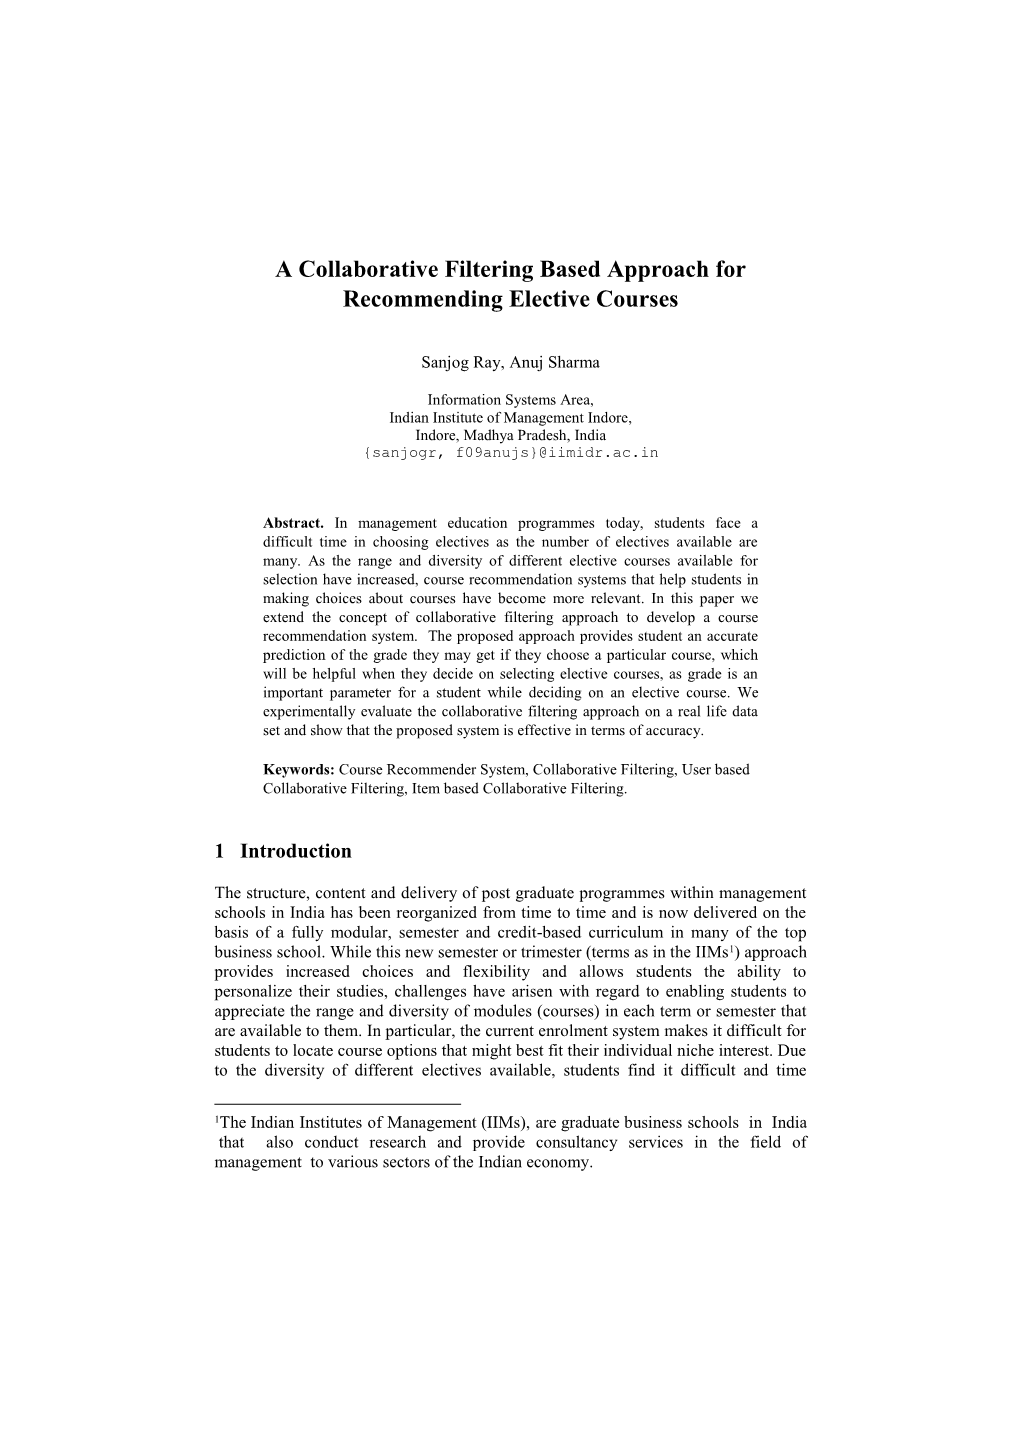 A Collaborative Filtering Based Approach for Recommending Elective Courses